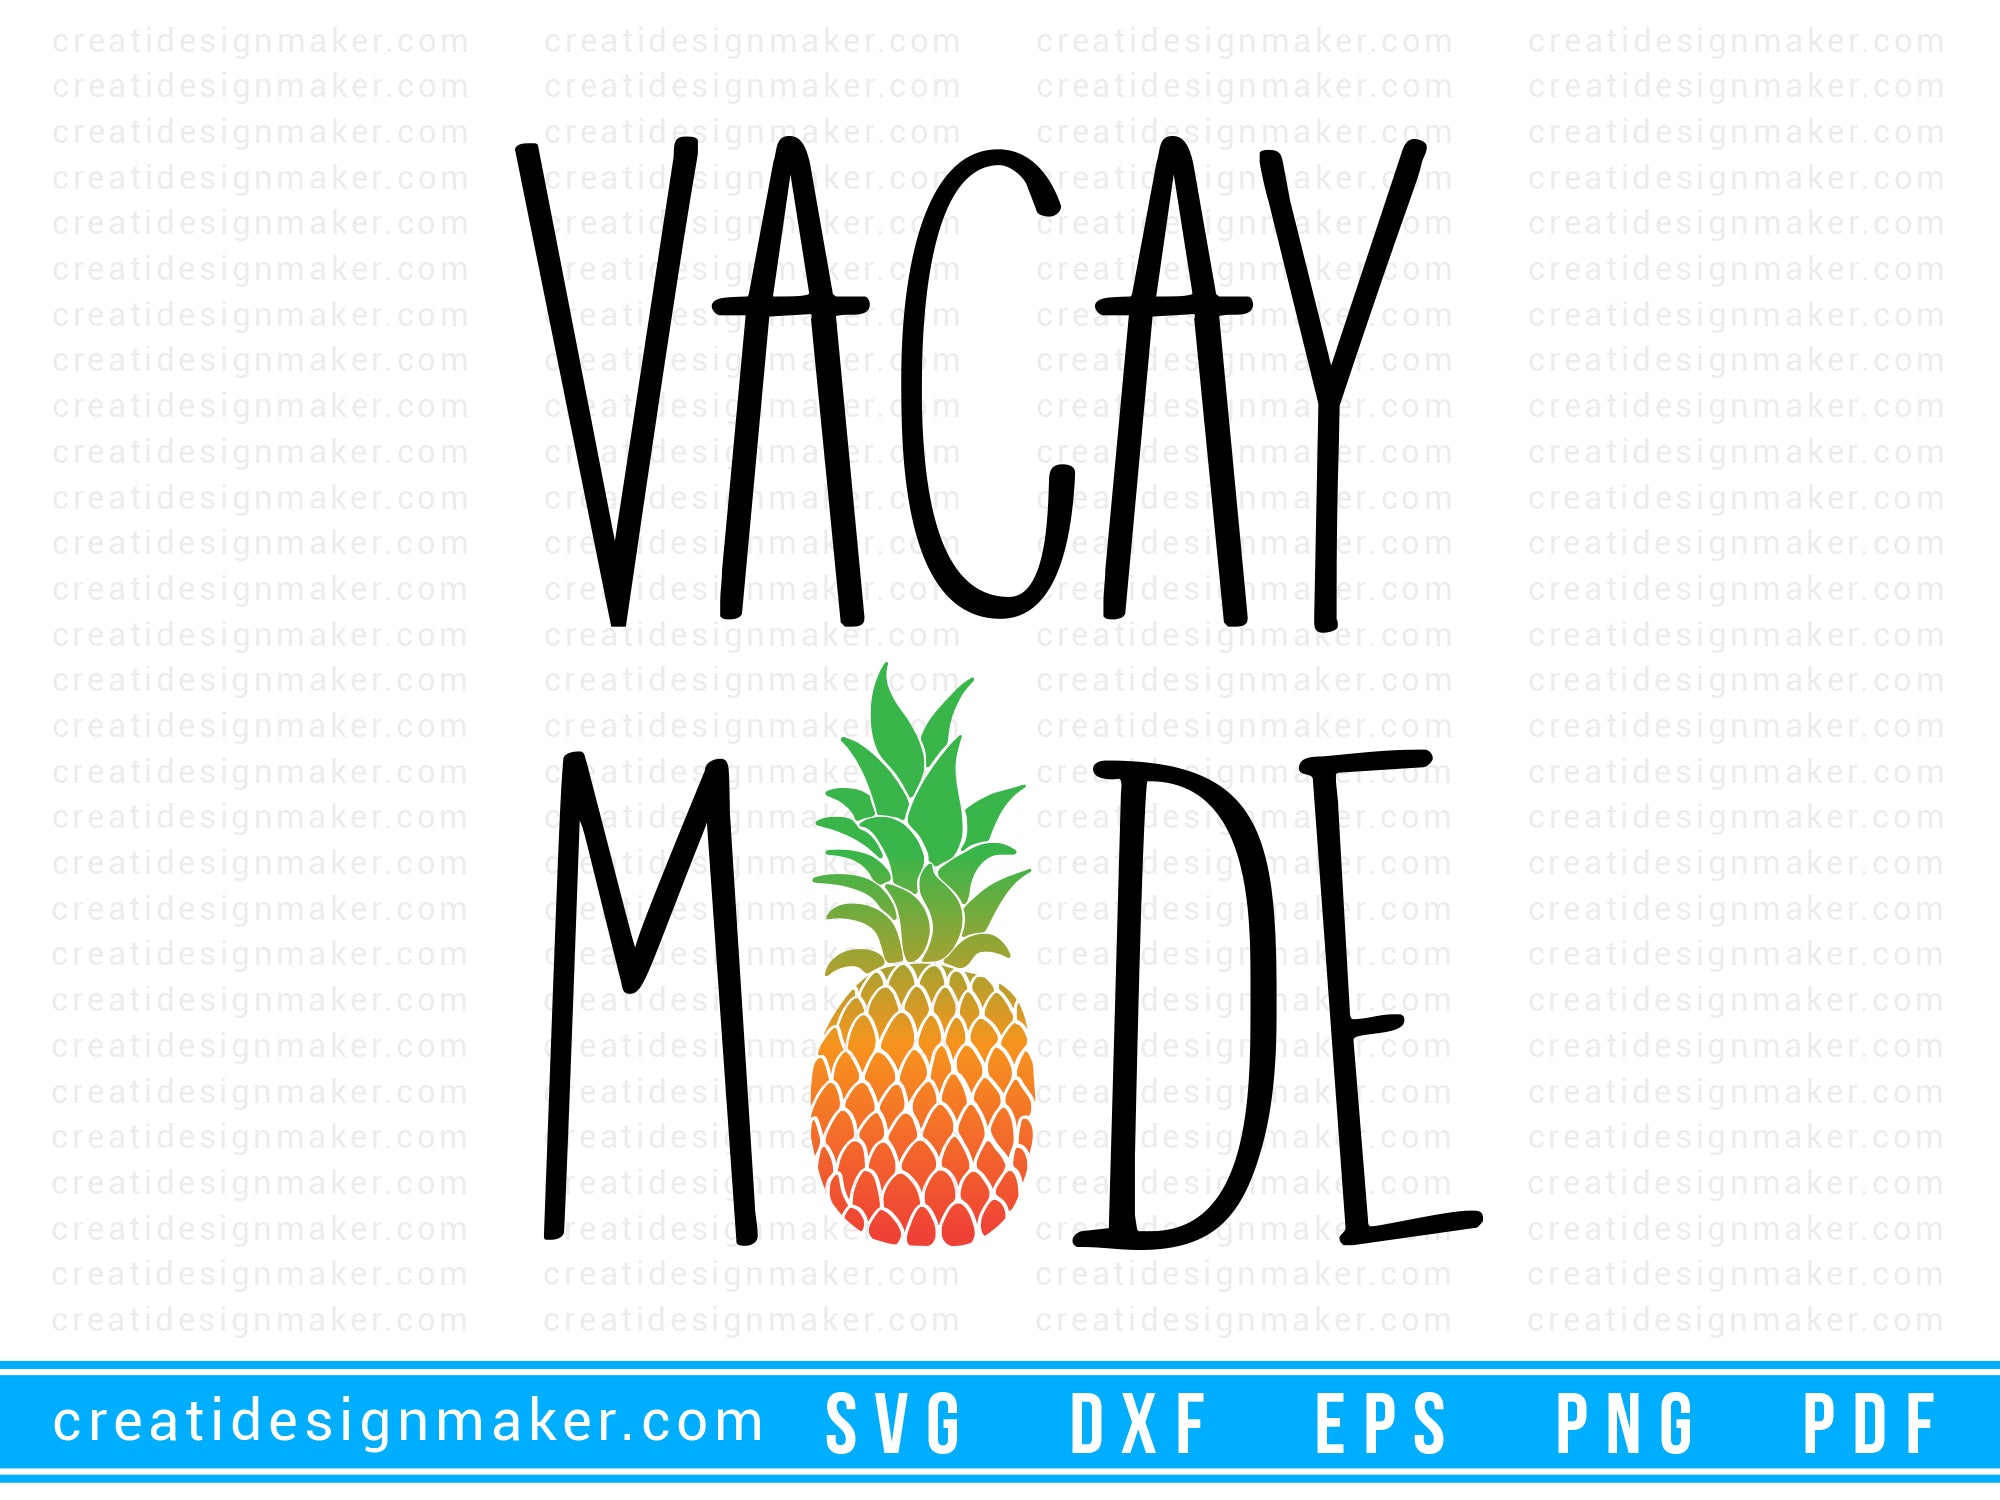 Vacay Mode summer svg Cut File For Cricut svg, dxf, png, eps, pdf Silhouette Printable Files